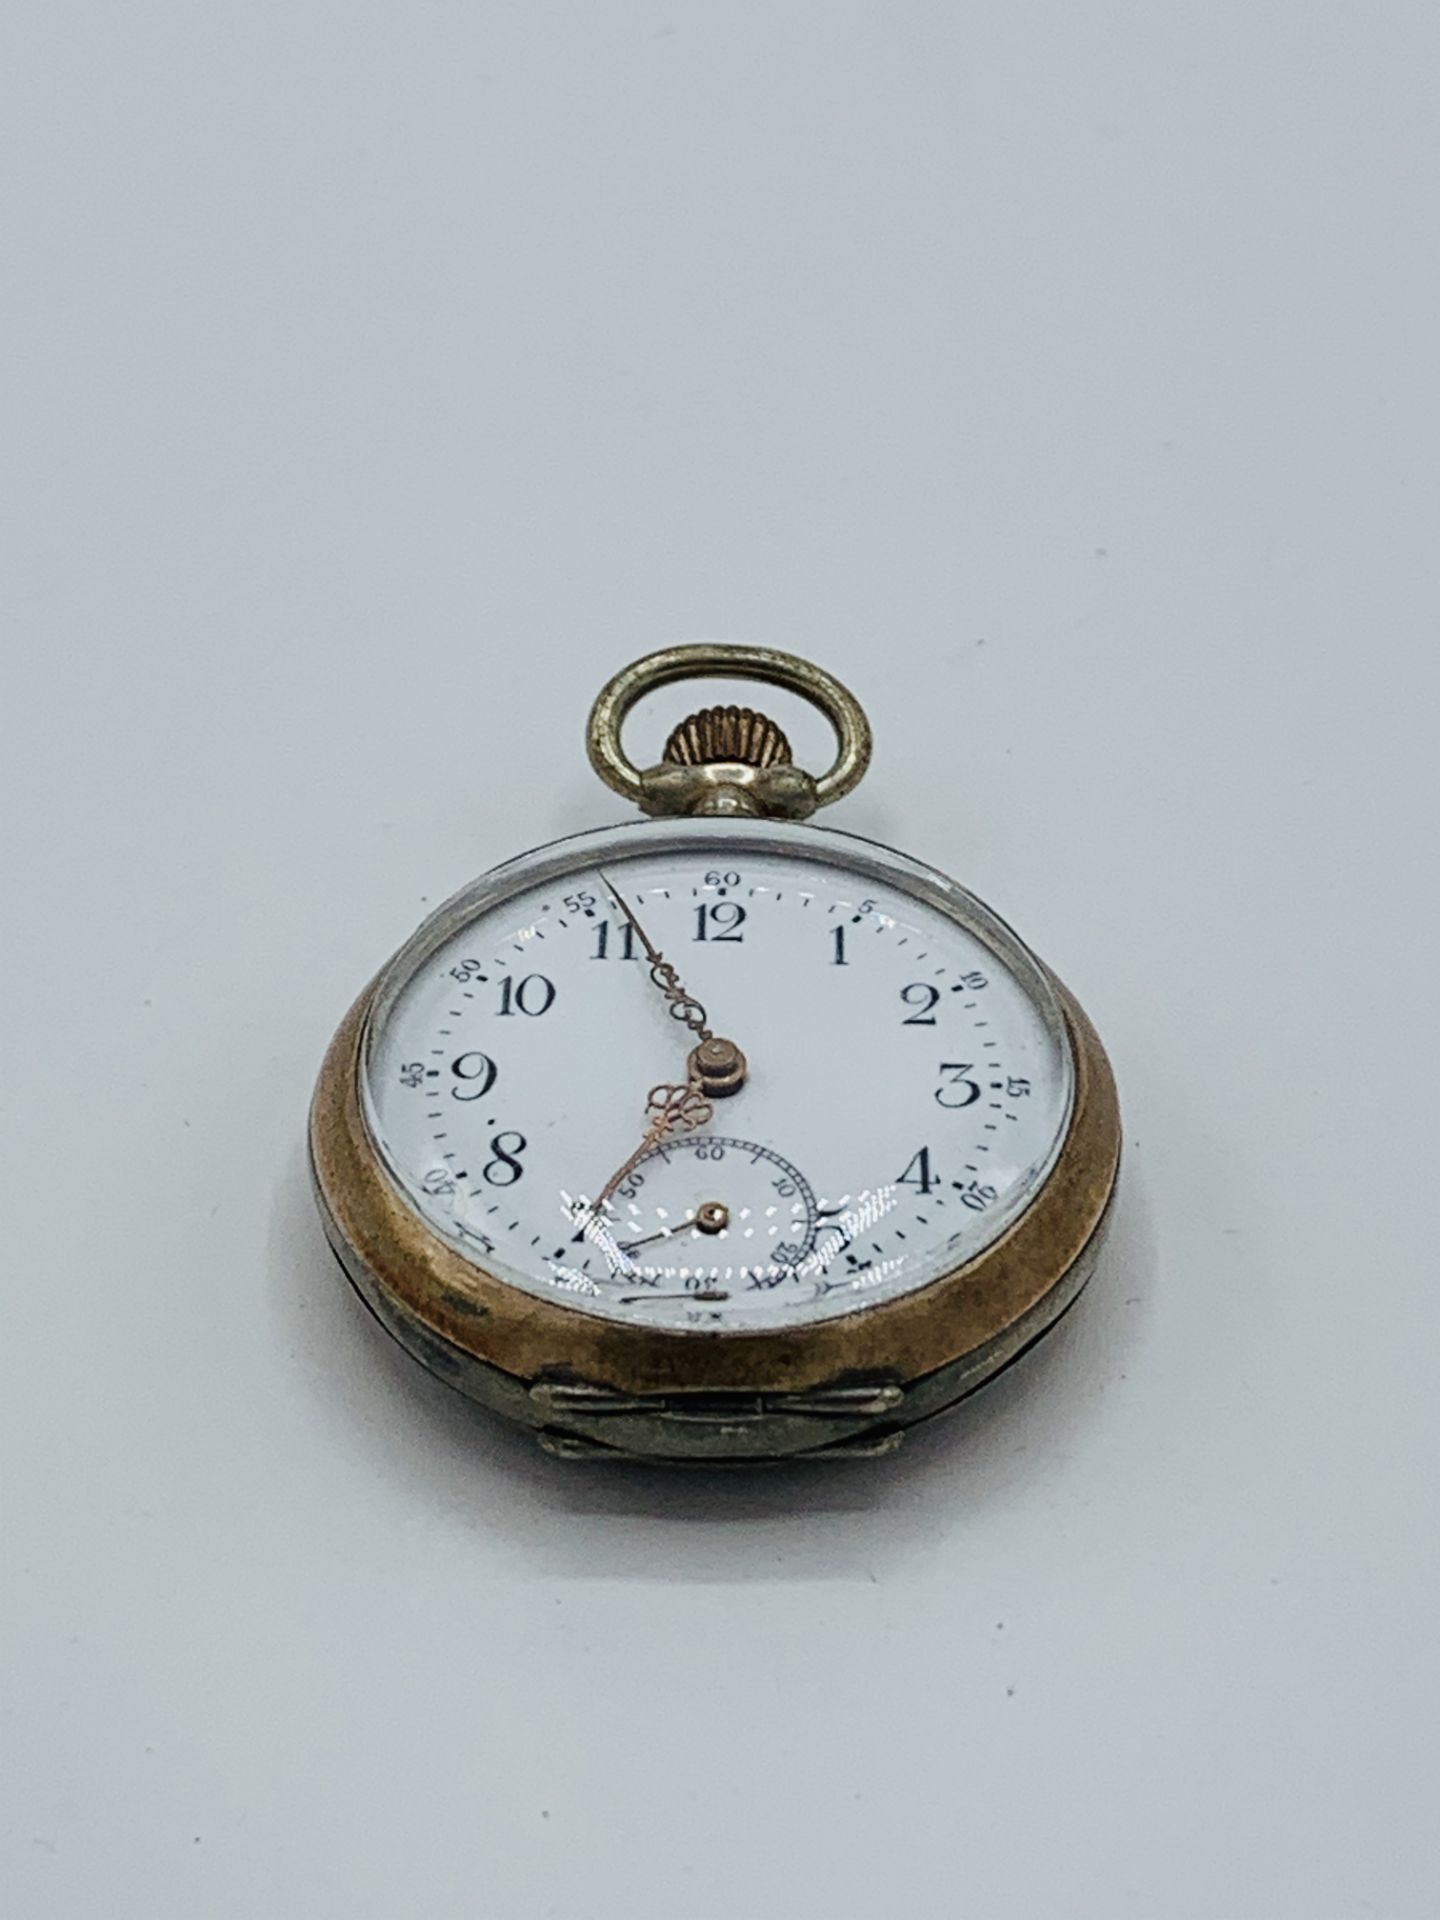 800 silver and gold plate case manual wind lady's pocket watch, in going order - Image 2 of 6